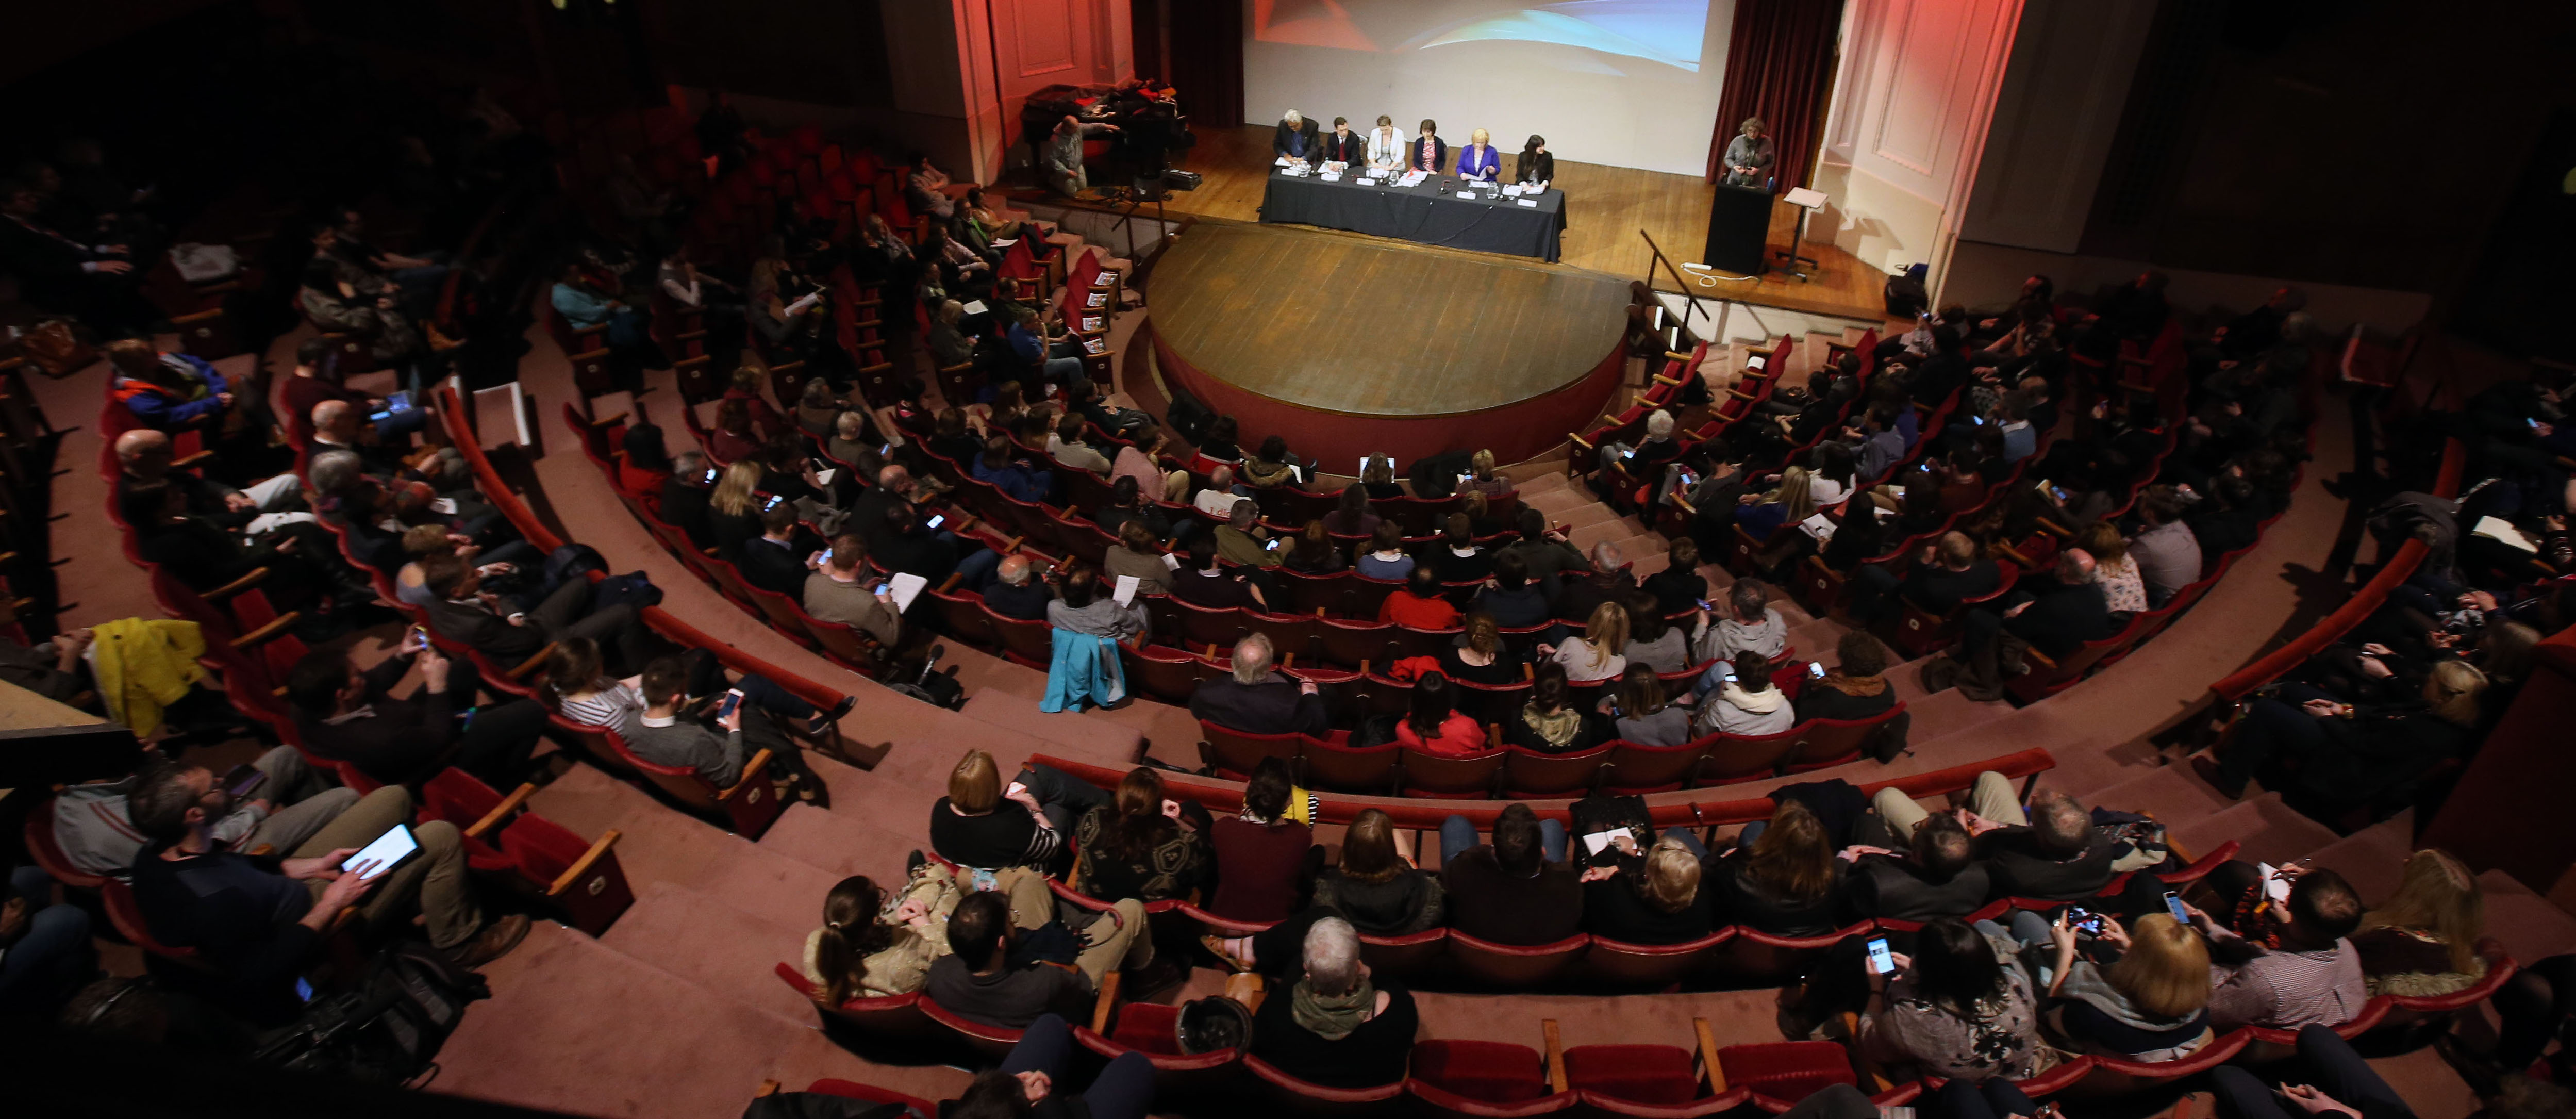 Audience and panel in Reardon Smith theatre